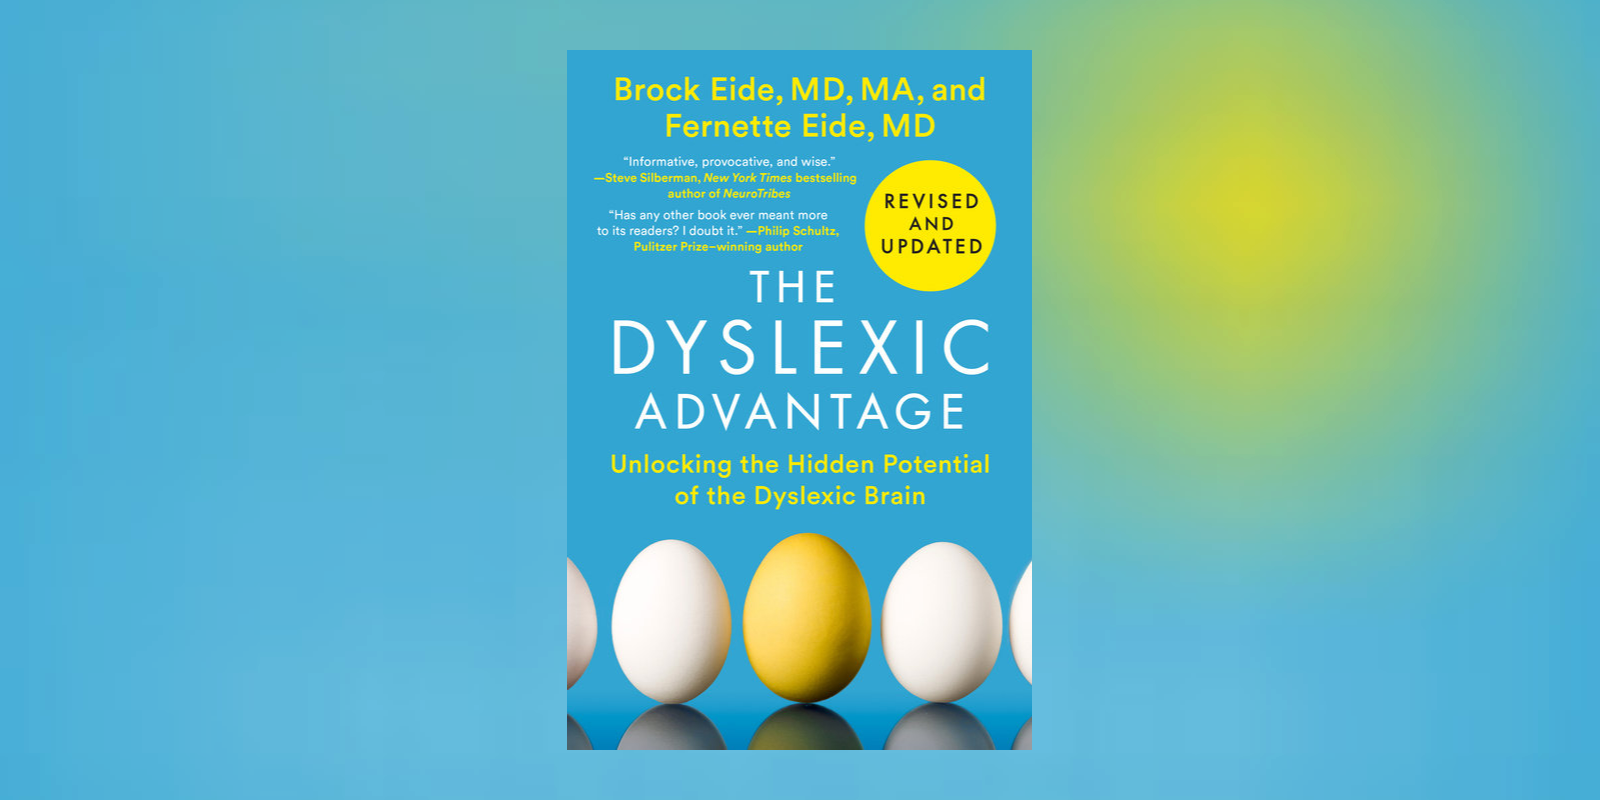 Watch Drs. Brock and Fernette Eide share insights from their revised and updated book <i>The Dyslexic Advantage</i>